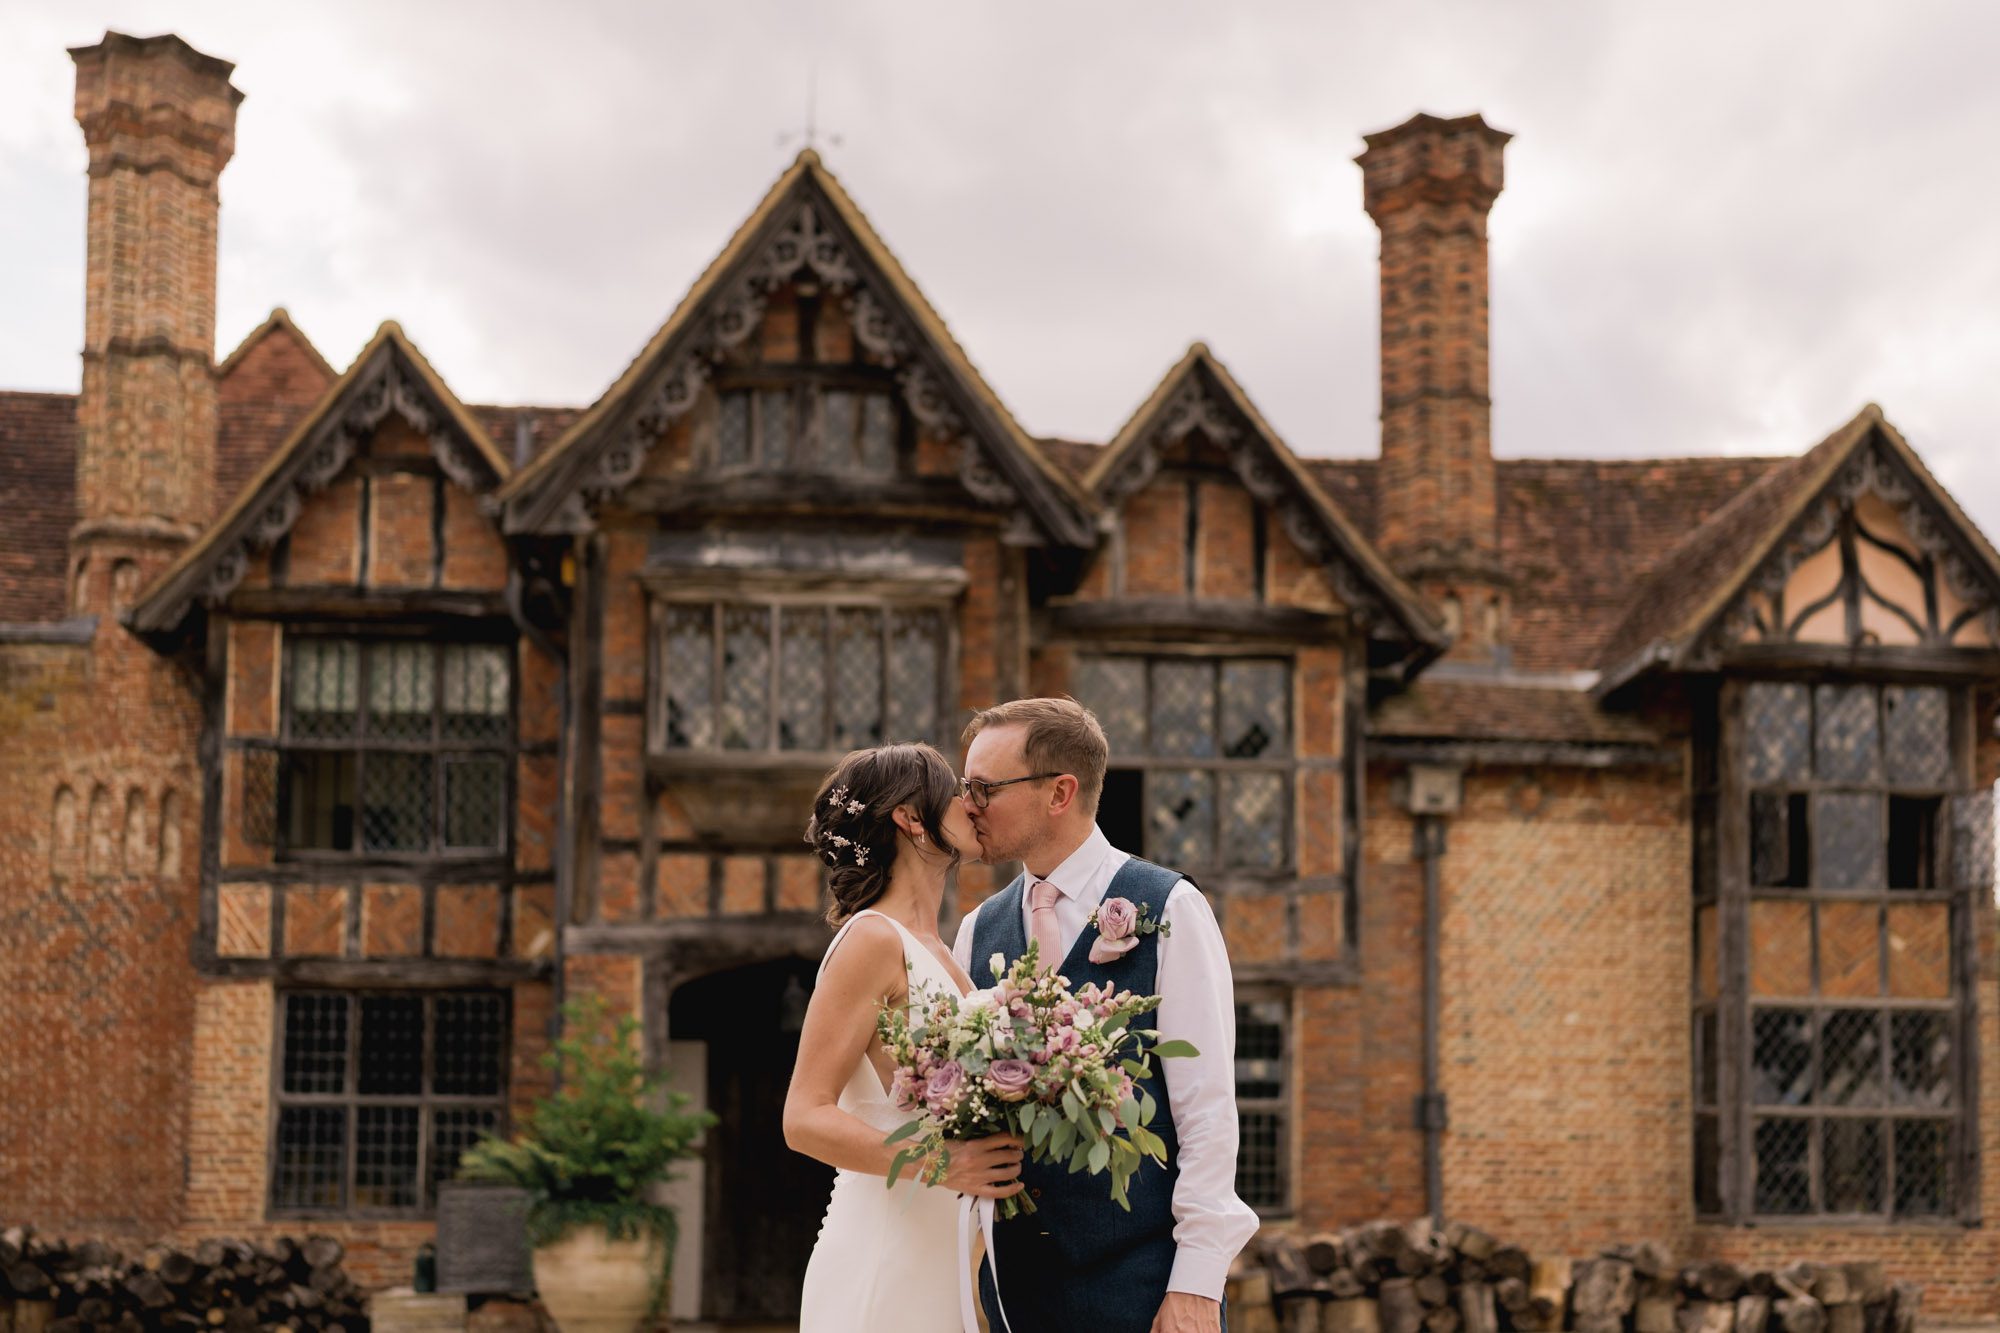 A bride and groom kiss on their wedding day with Dorney Court in the bsackground.